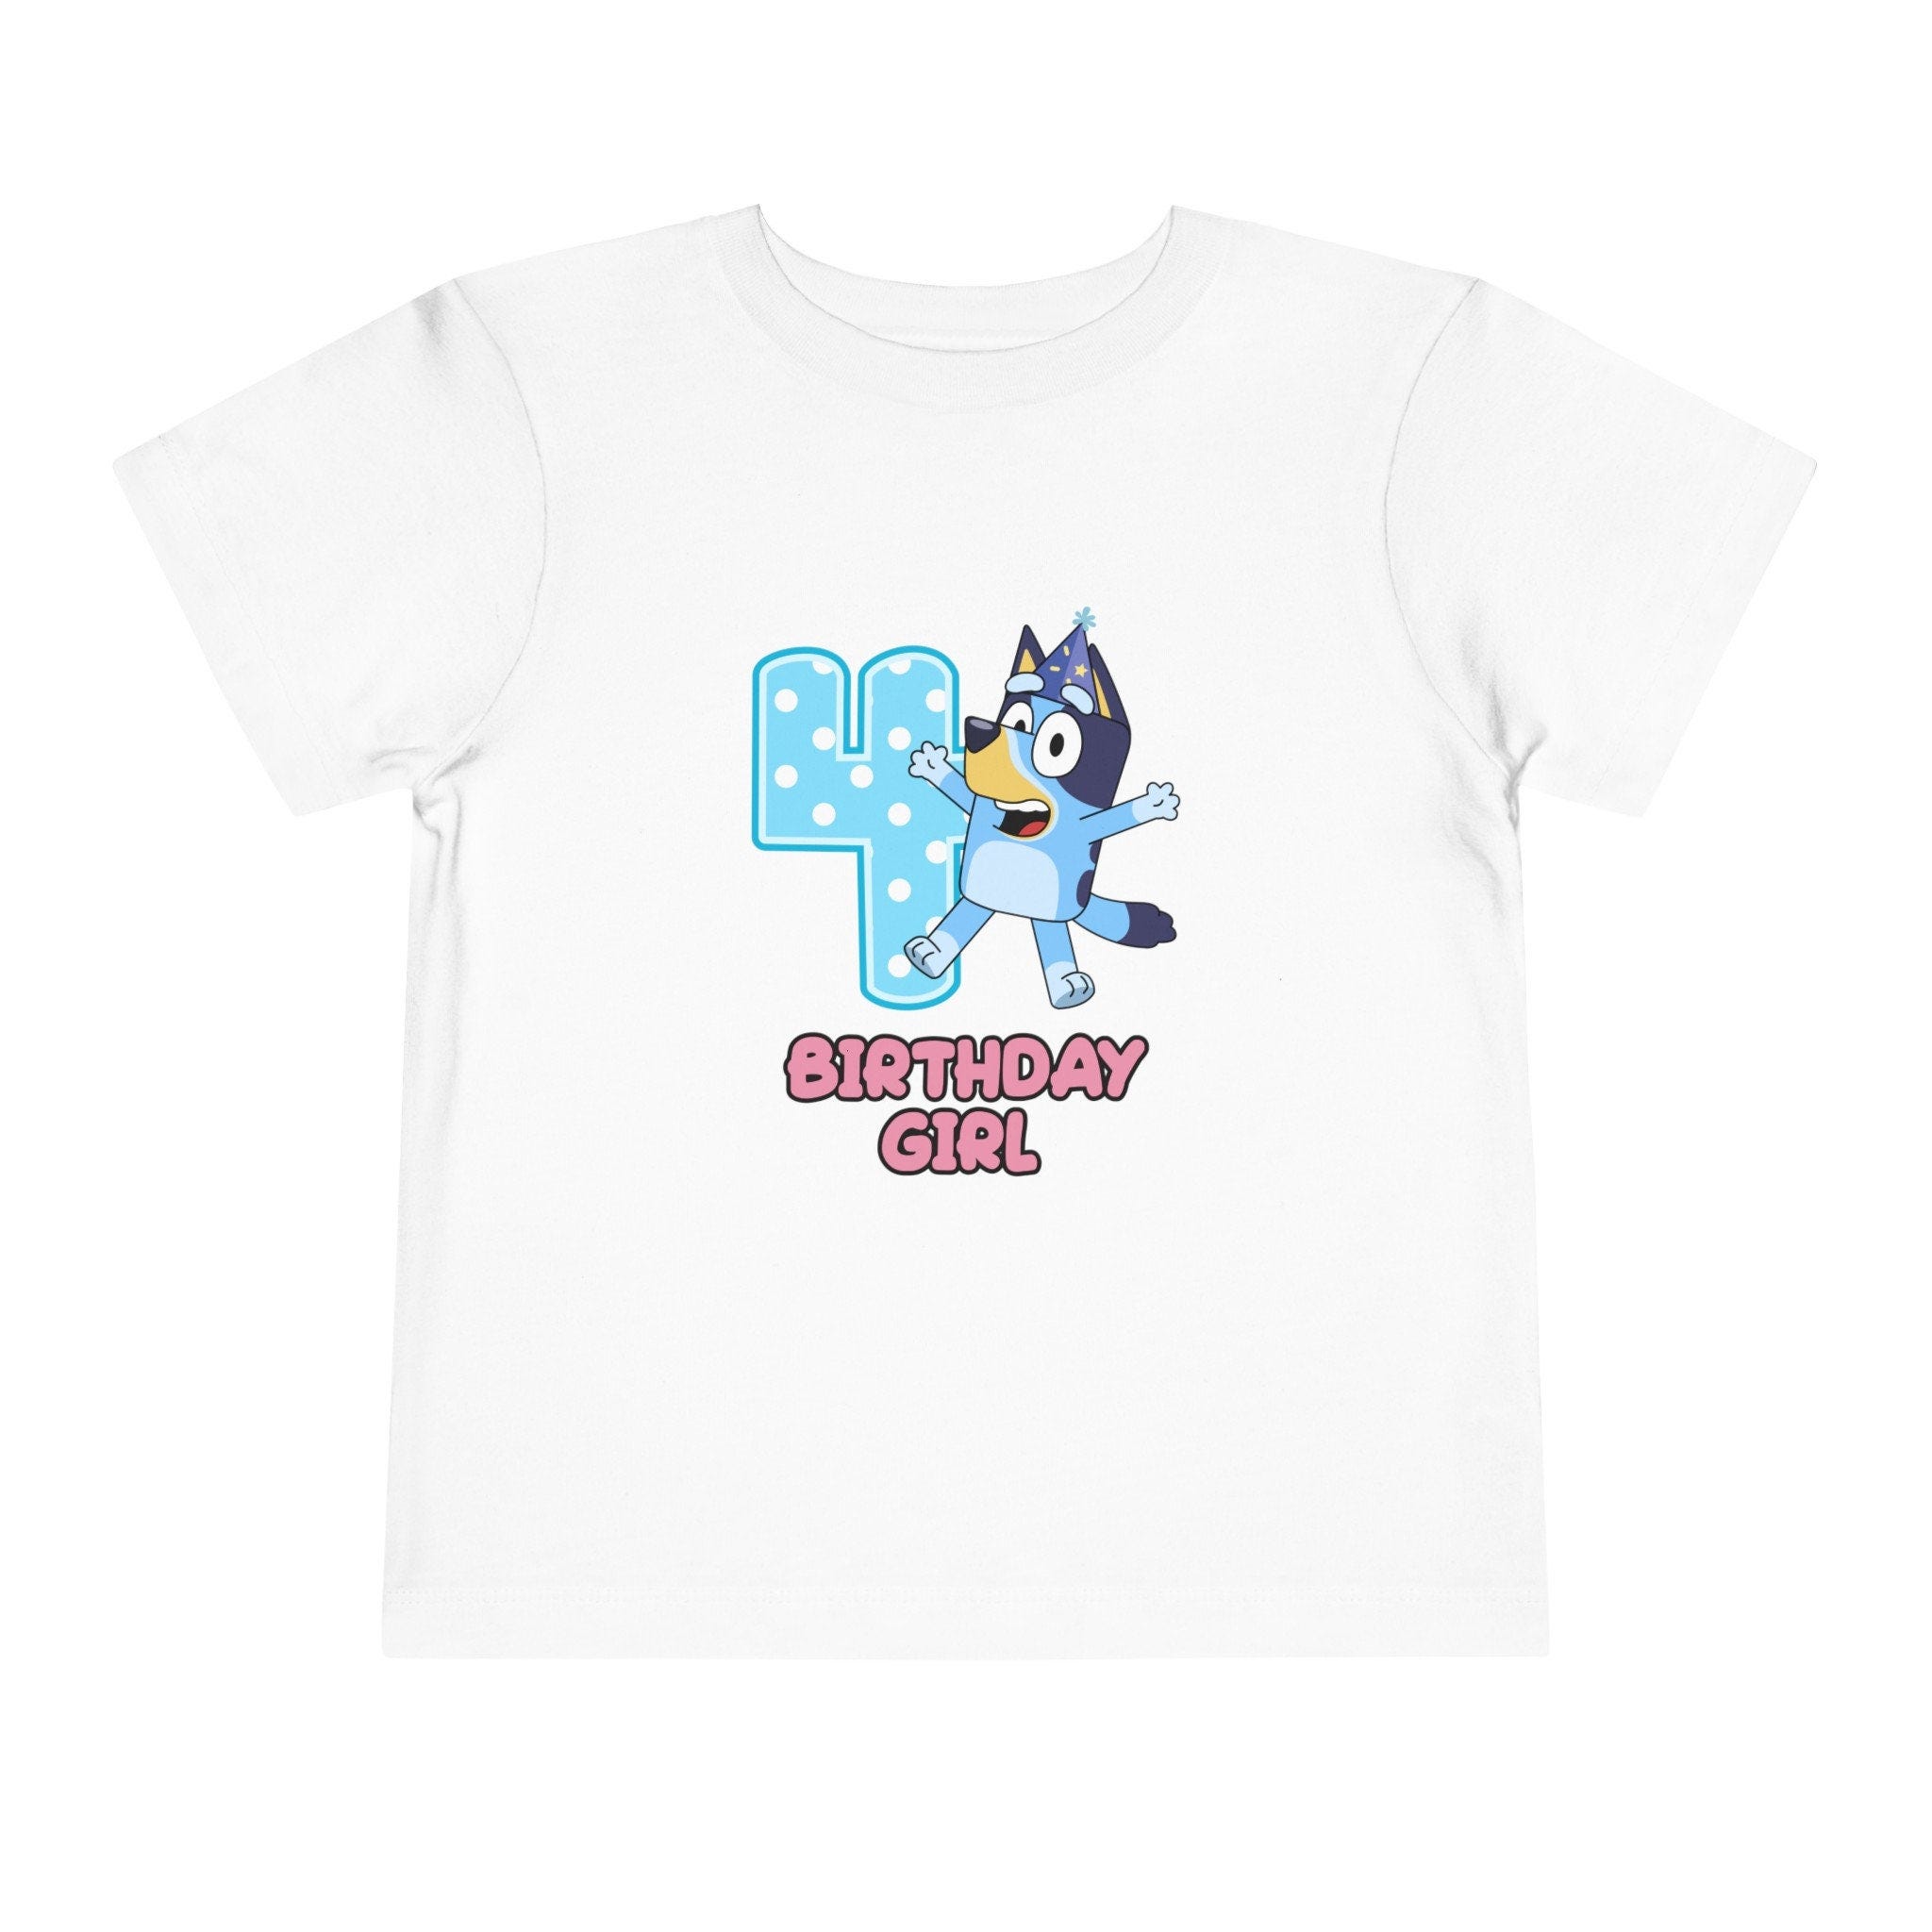 Bluey Birthday, Custom Age and Name, Custom Text, Dance Mode, Party, Bluey and Friends, Bluey Gift -Toddler Short Sleeve Tee